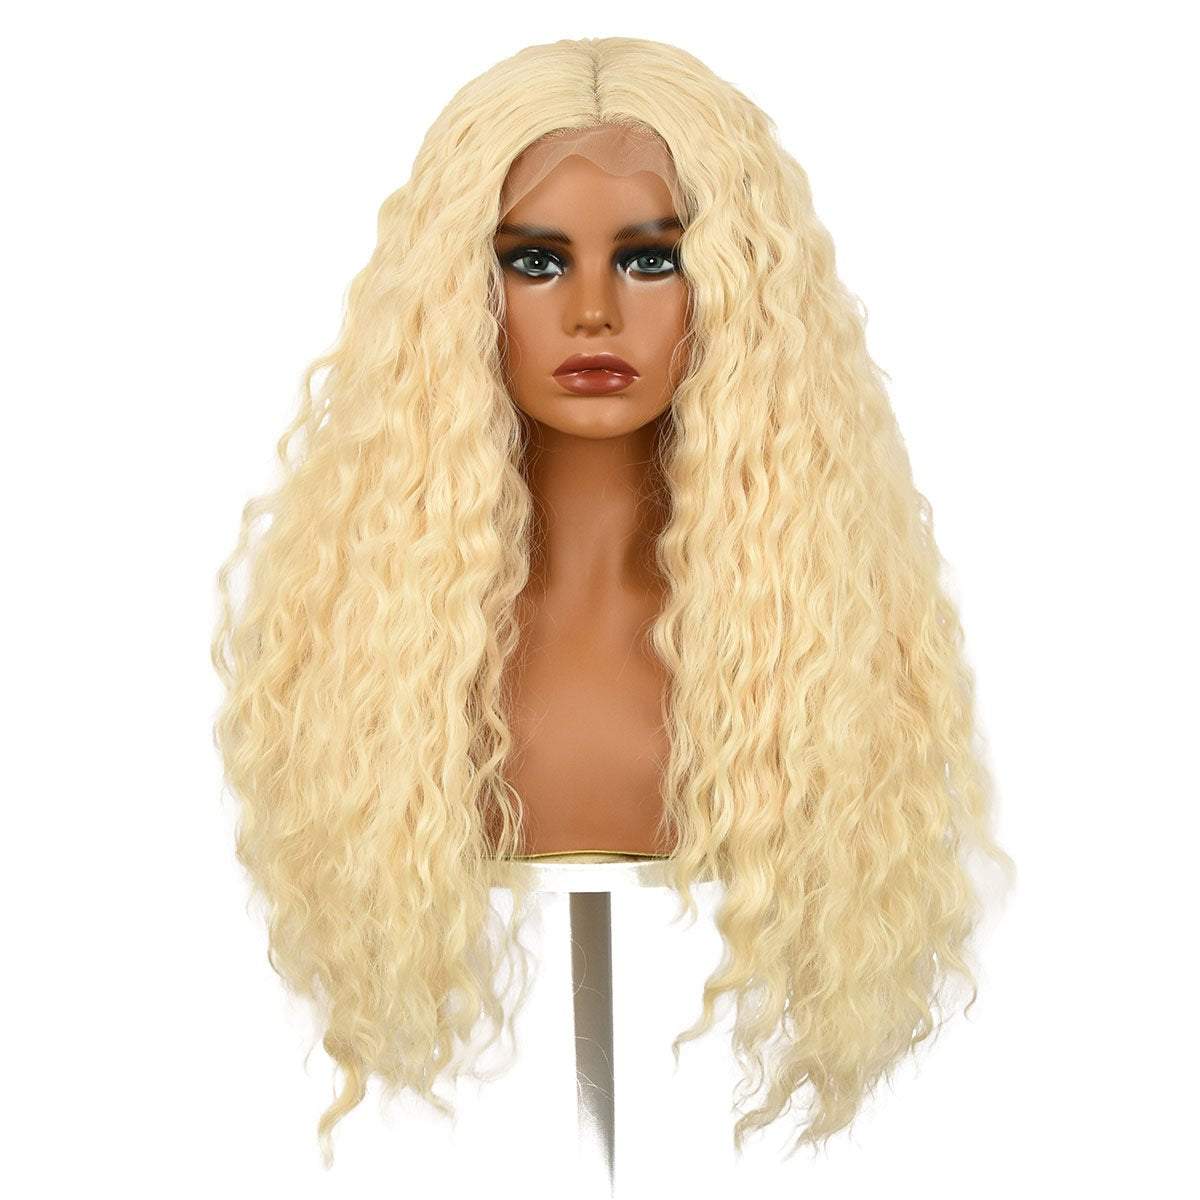 28 Inches | Blonde | Daily Style | Curly Hair without Bangs | Synthetic Lace Front |SML721 - TapLike